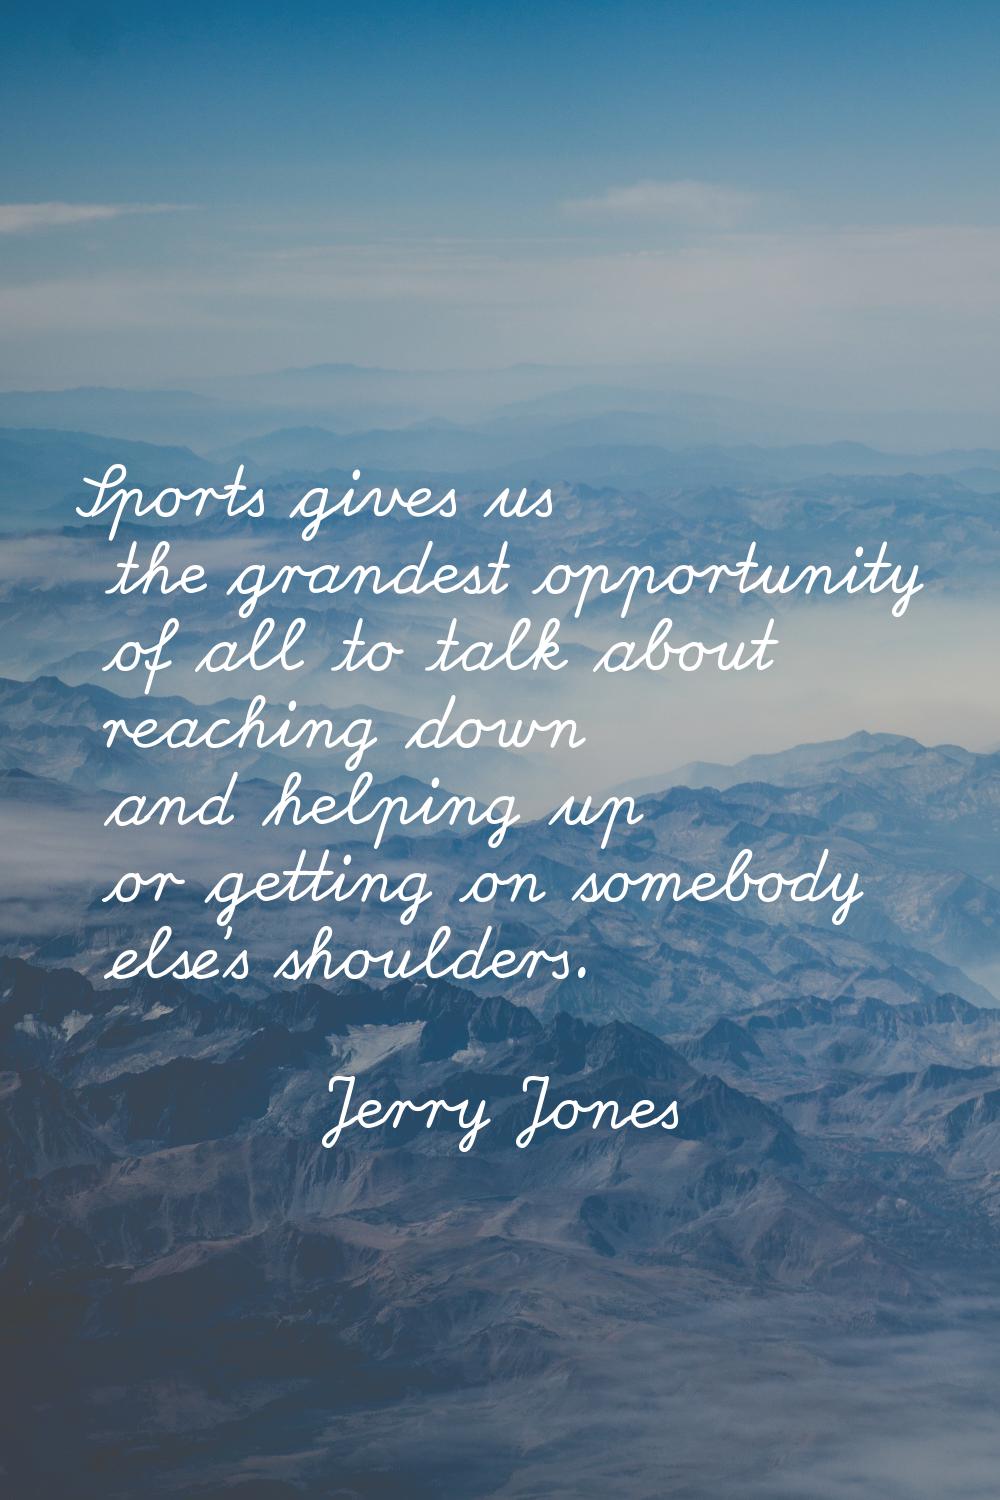 Sports gives us the grandest opportunity of all to talk about reaching down and helping up or getti